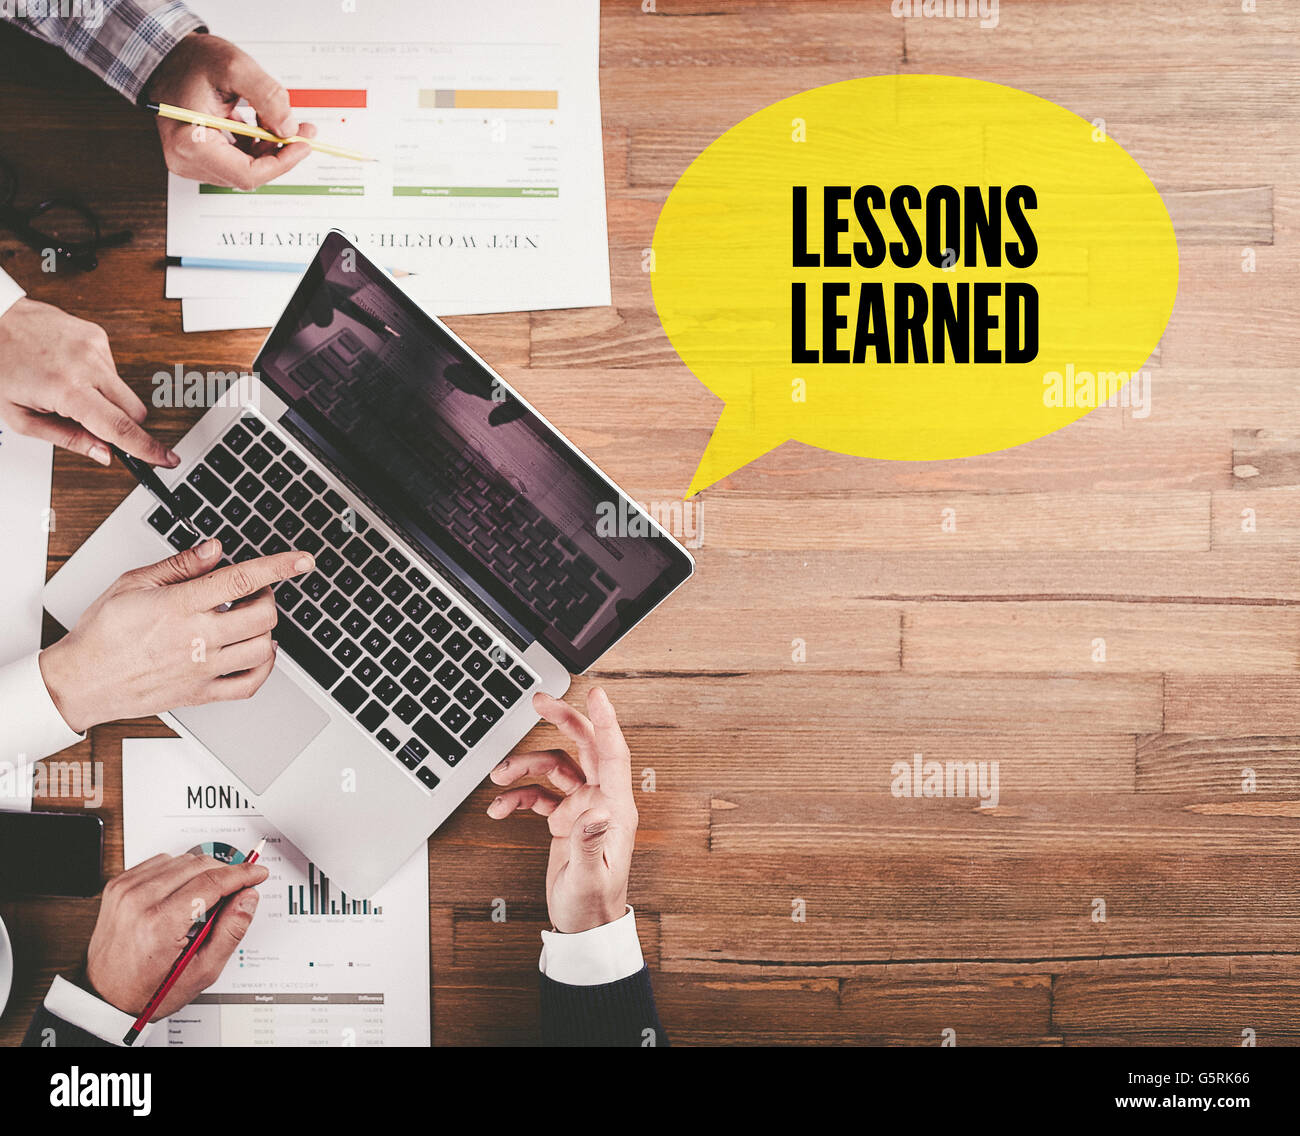 931,060 Lessons Learned Images, Stock Photos, 3D objects